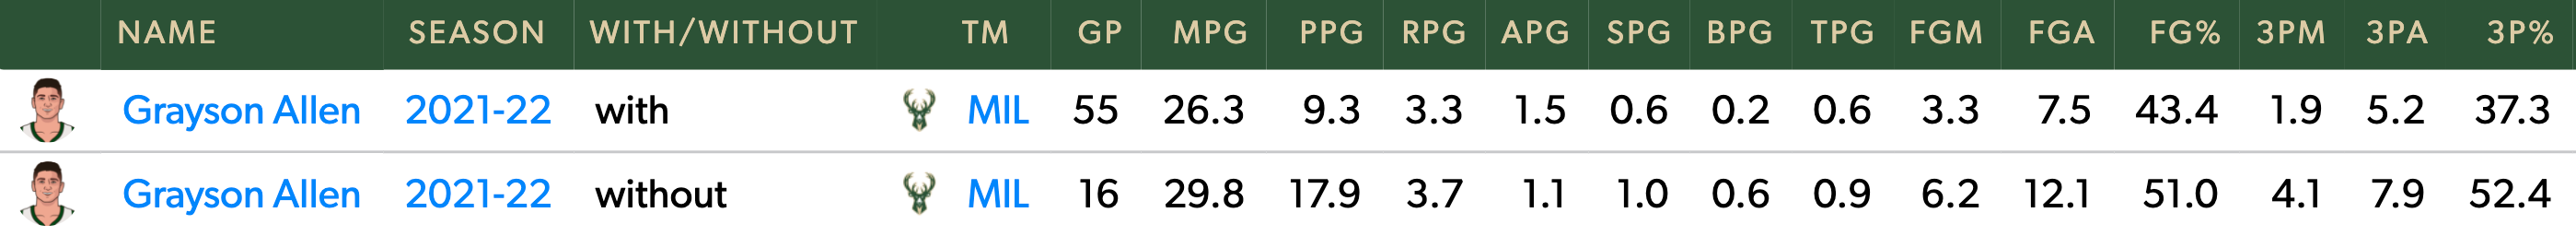 Allen's stats with and without Middleton this season, including playoffs.